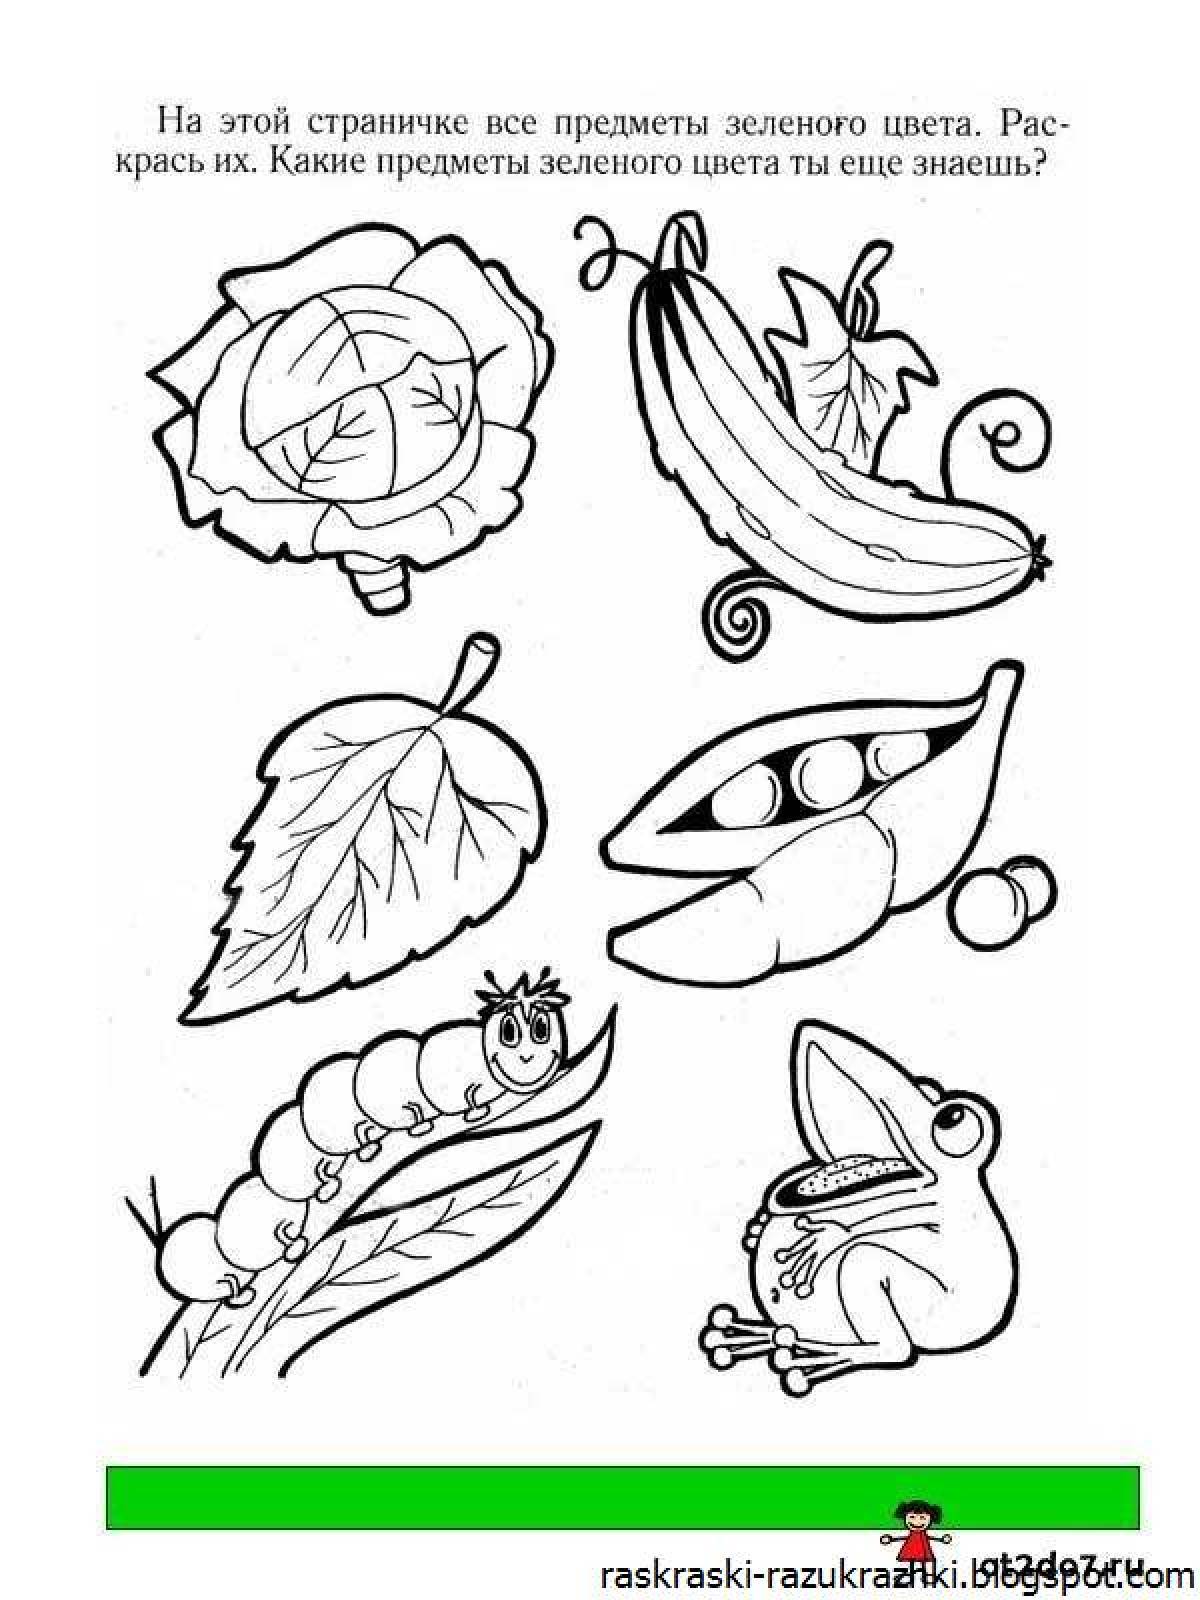 The charm of all coloring pages